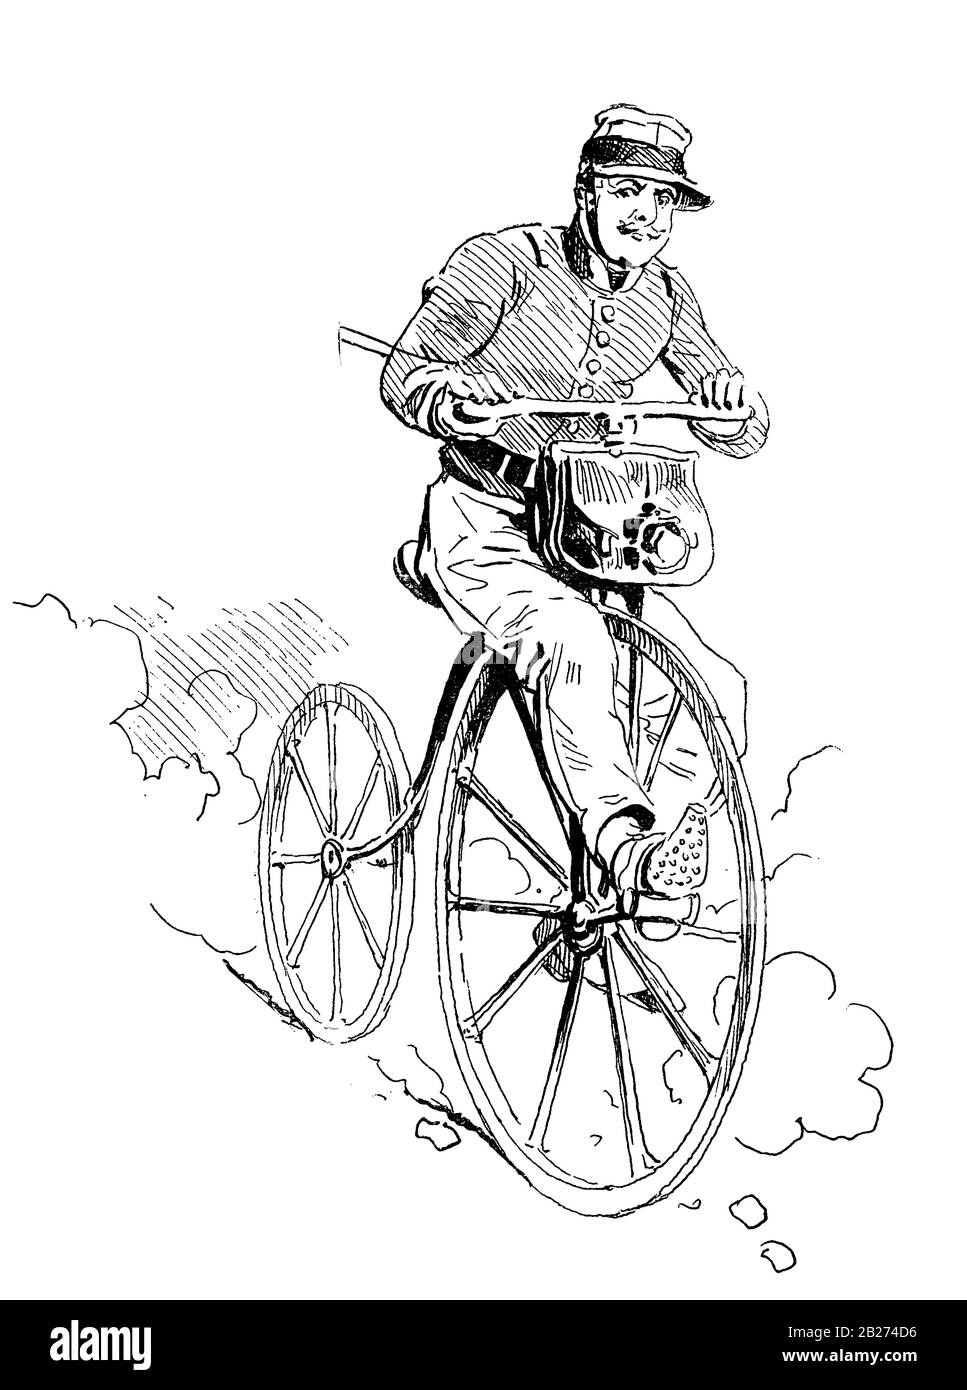 French humor and caricature: city guard on duty riding a high wheel bicycle Stock Photo